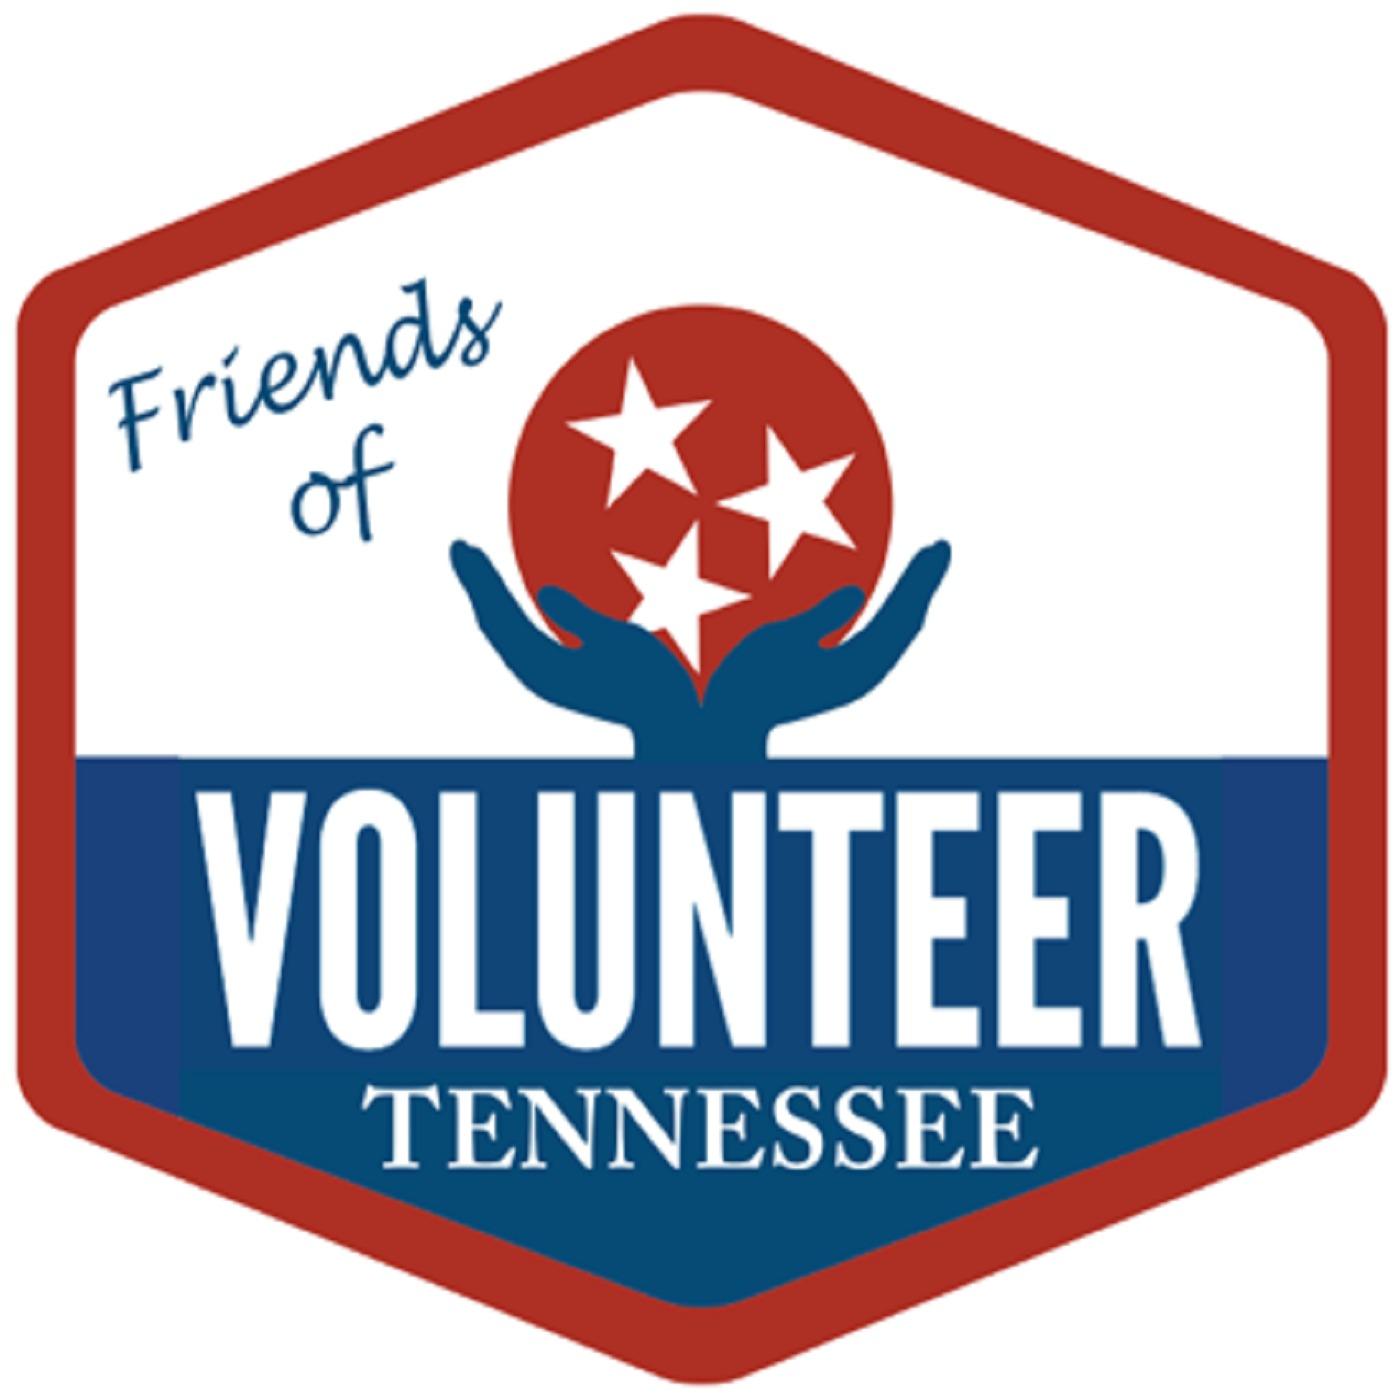 Volunteerism and Service in Tennessee